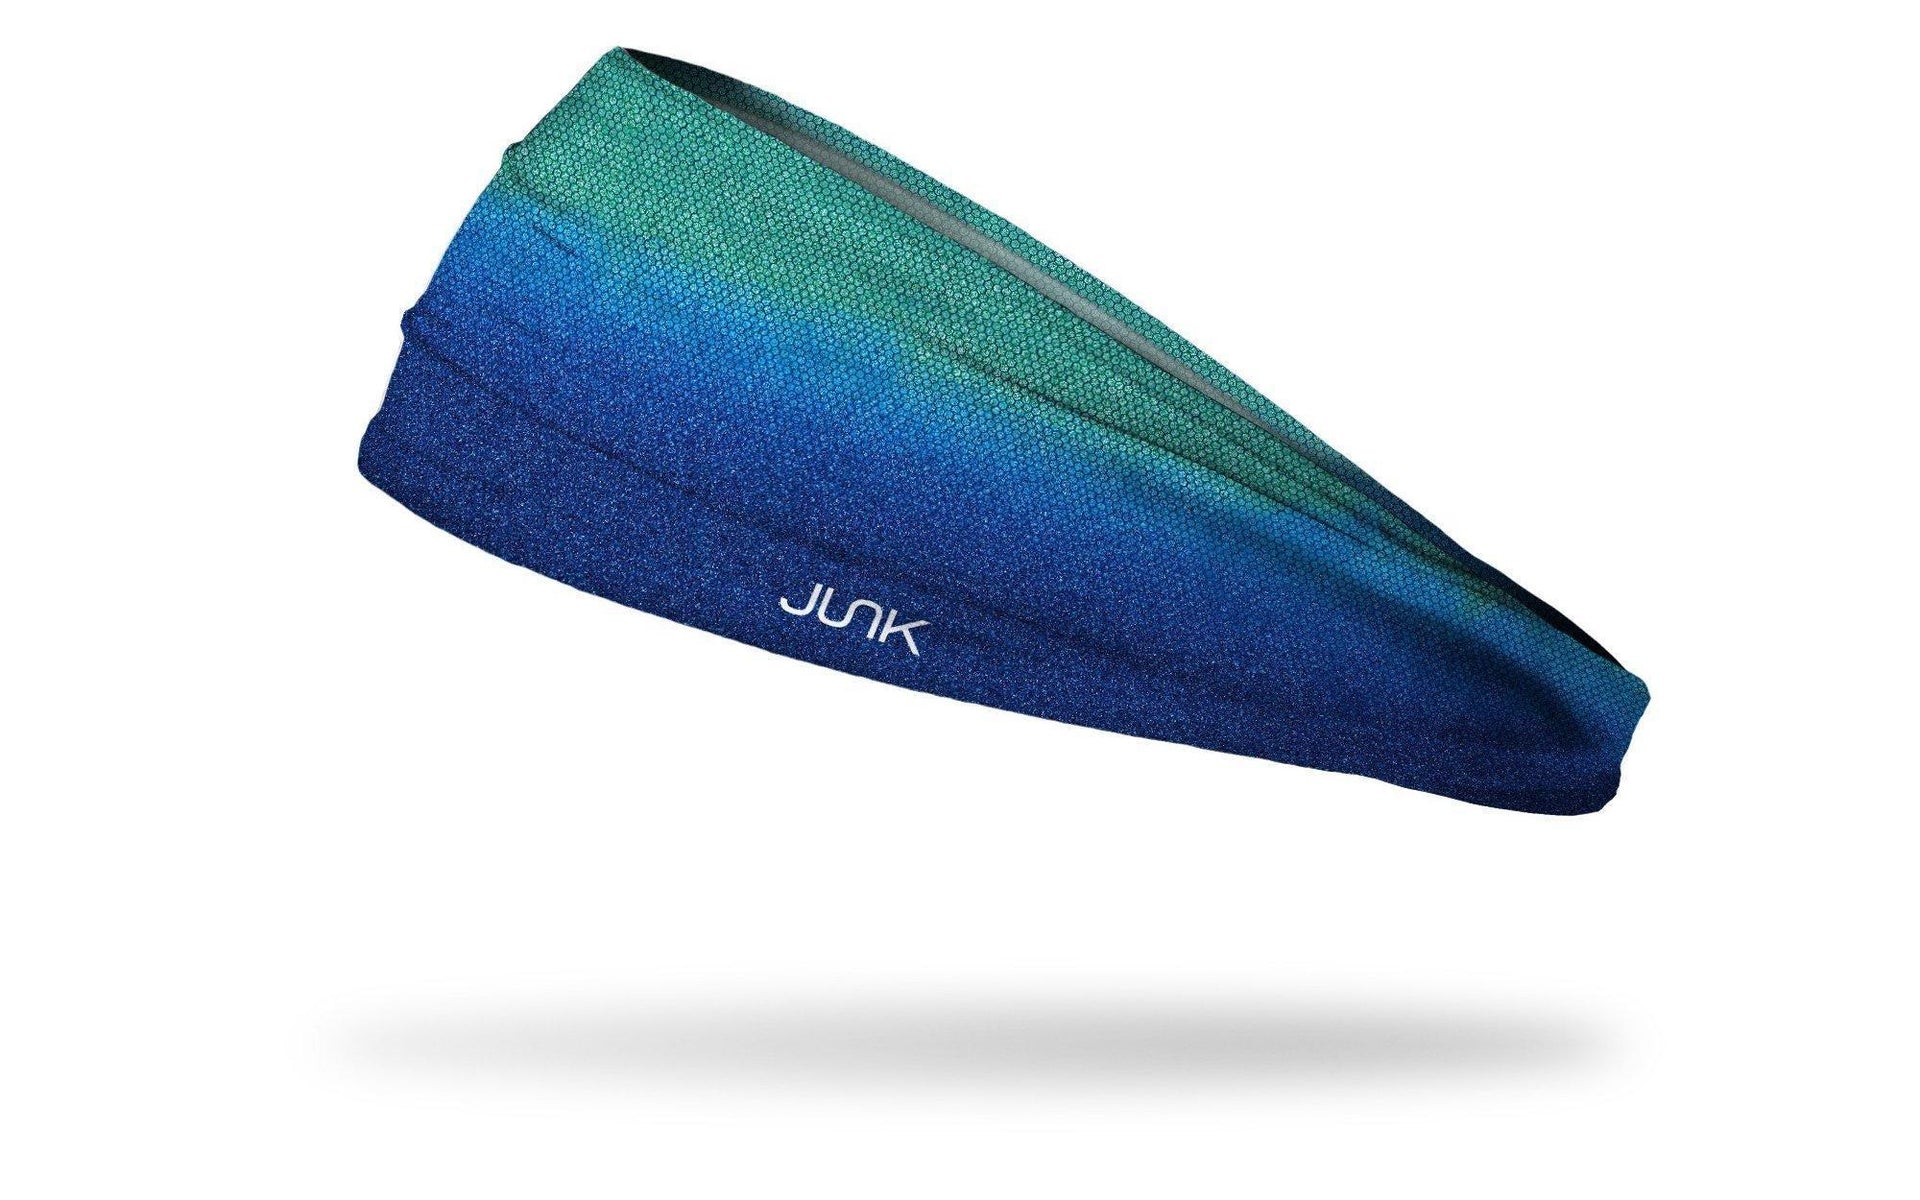 headband with teal green to aqua blue texturized gradient design